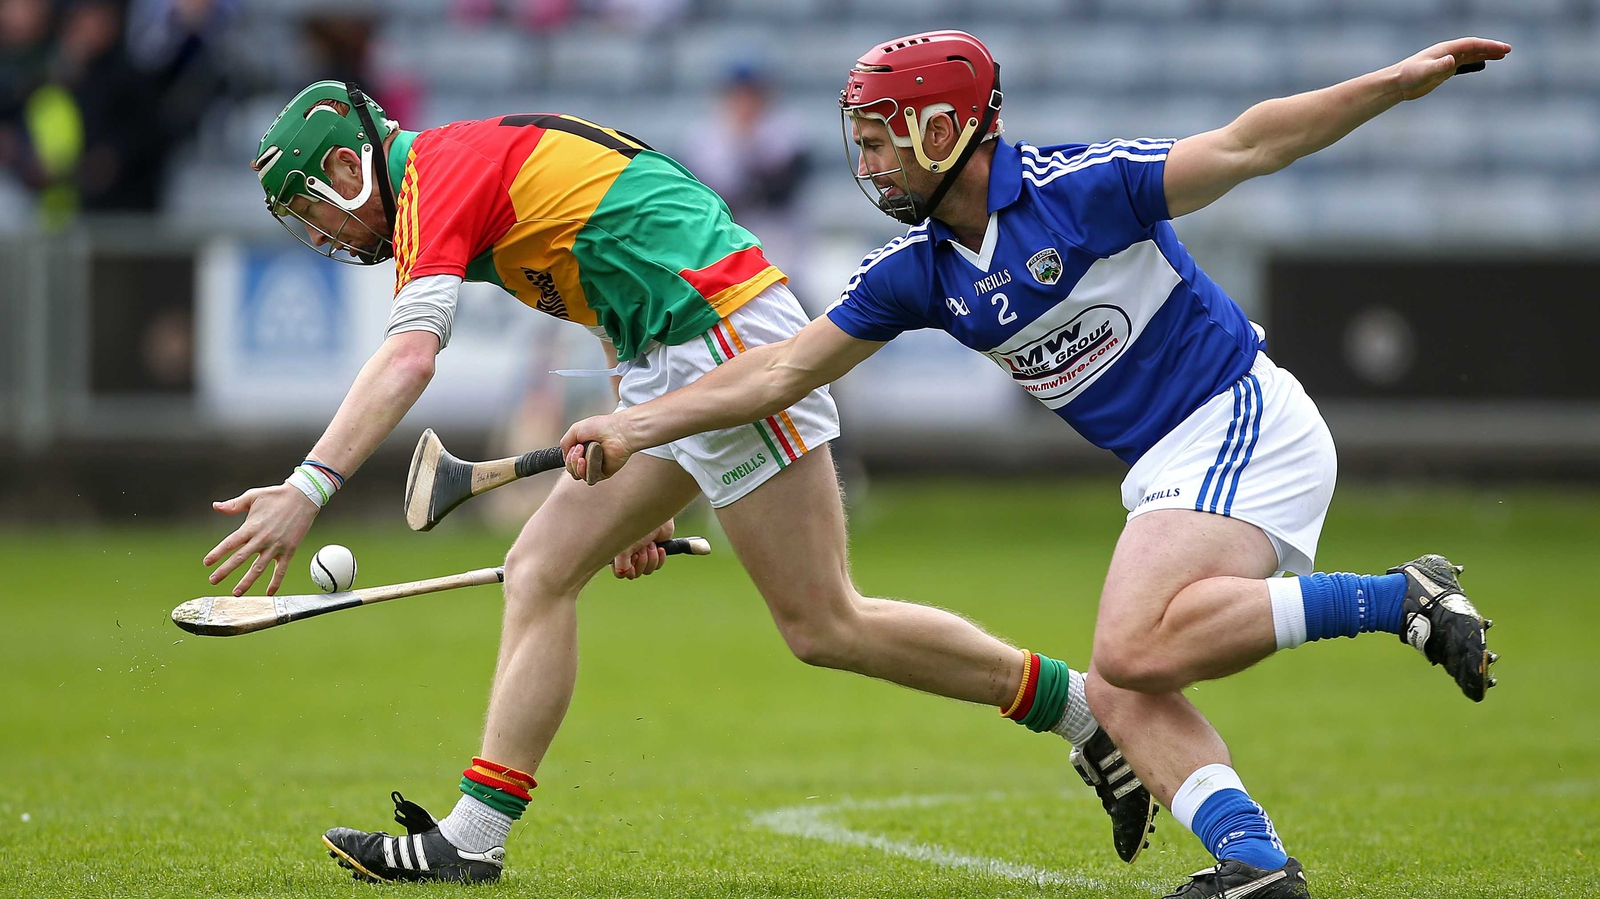 Sunday's Leinster Hurling Championship results